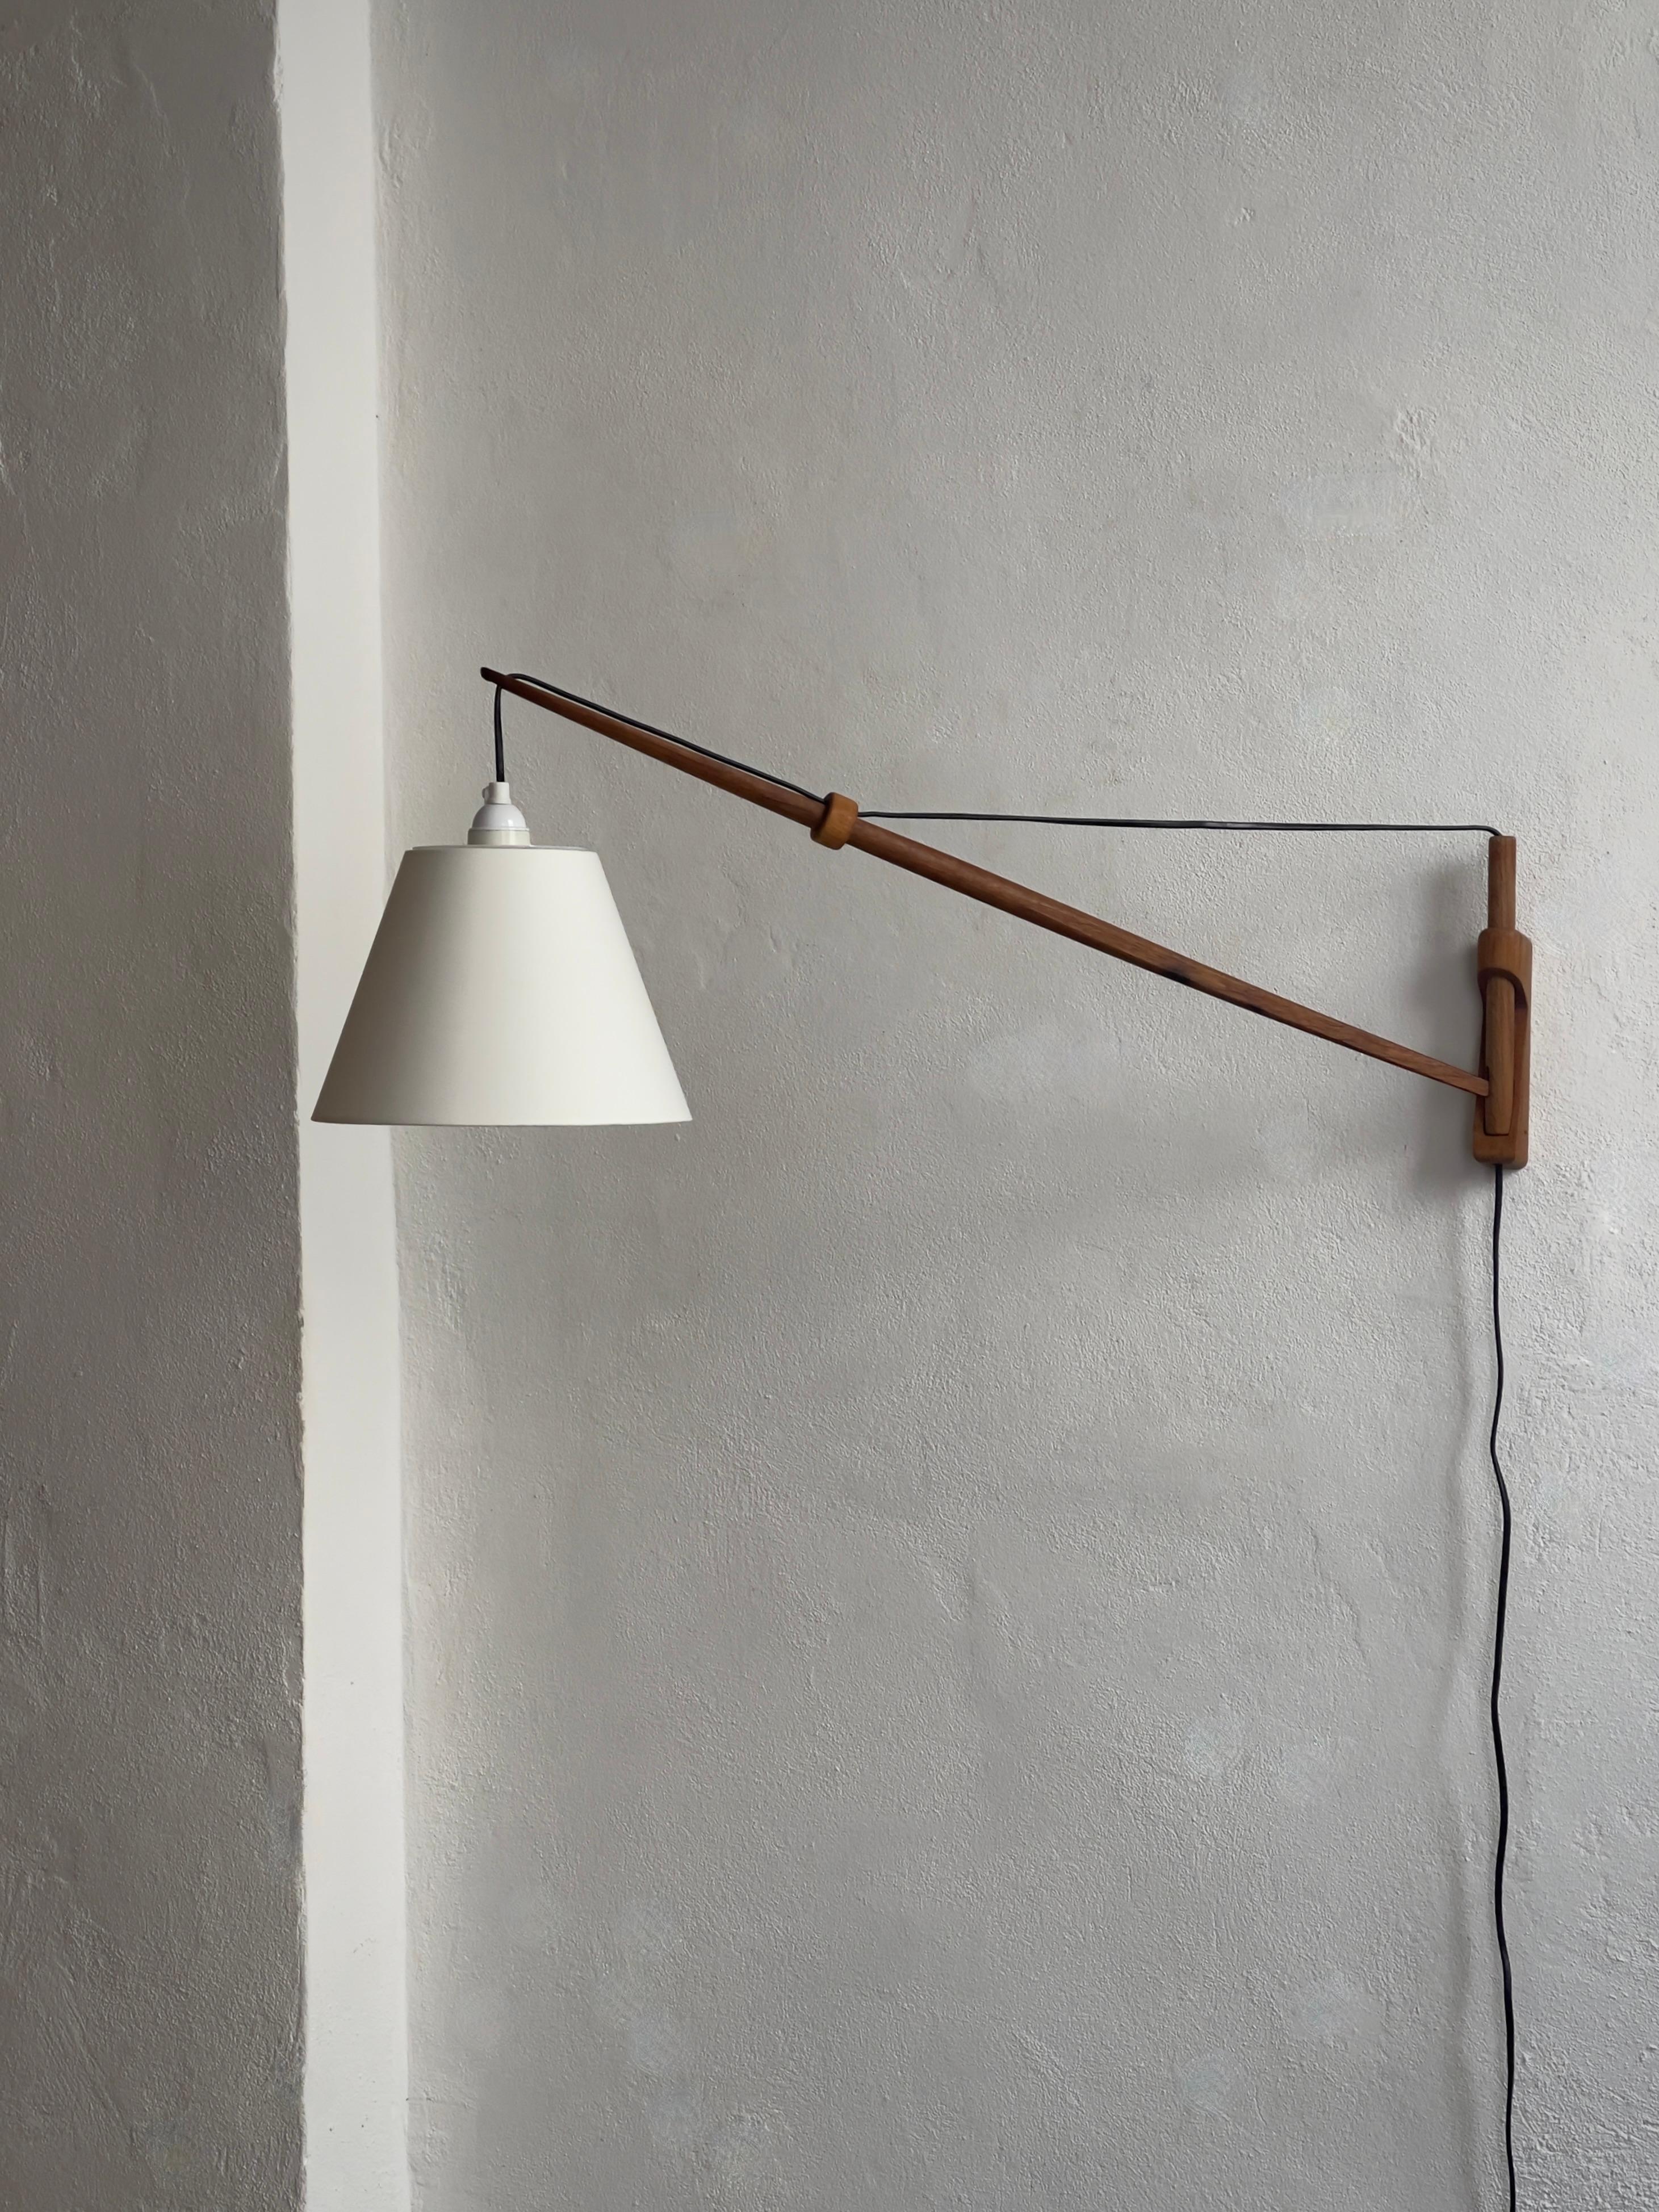 An elegant danish modern wall lamp / pendant. Adjustable to both sides and elevatable. Crafted from solid patinated oak, this wall lamp embodies the movement's penchant for organic materials. Oak's warmth and unique grain patterns give it a timeless